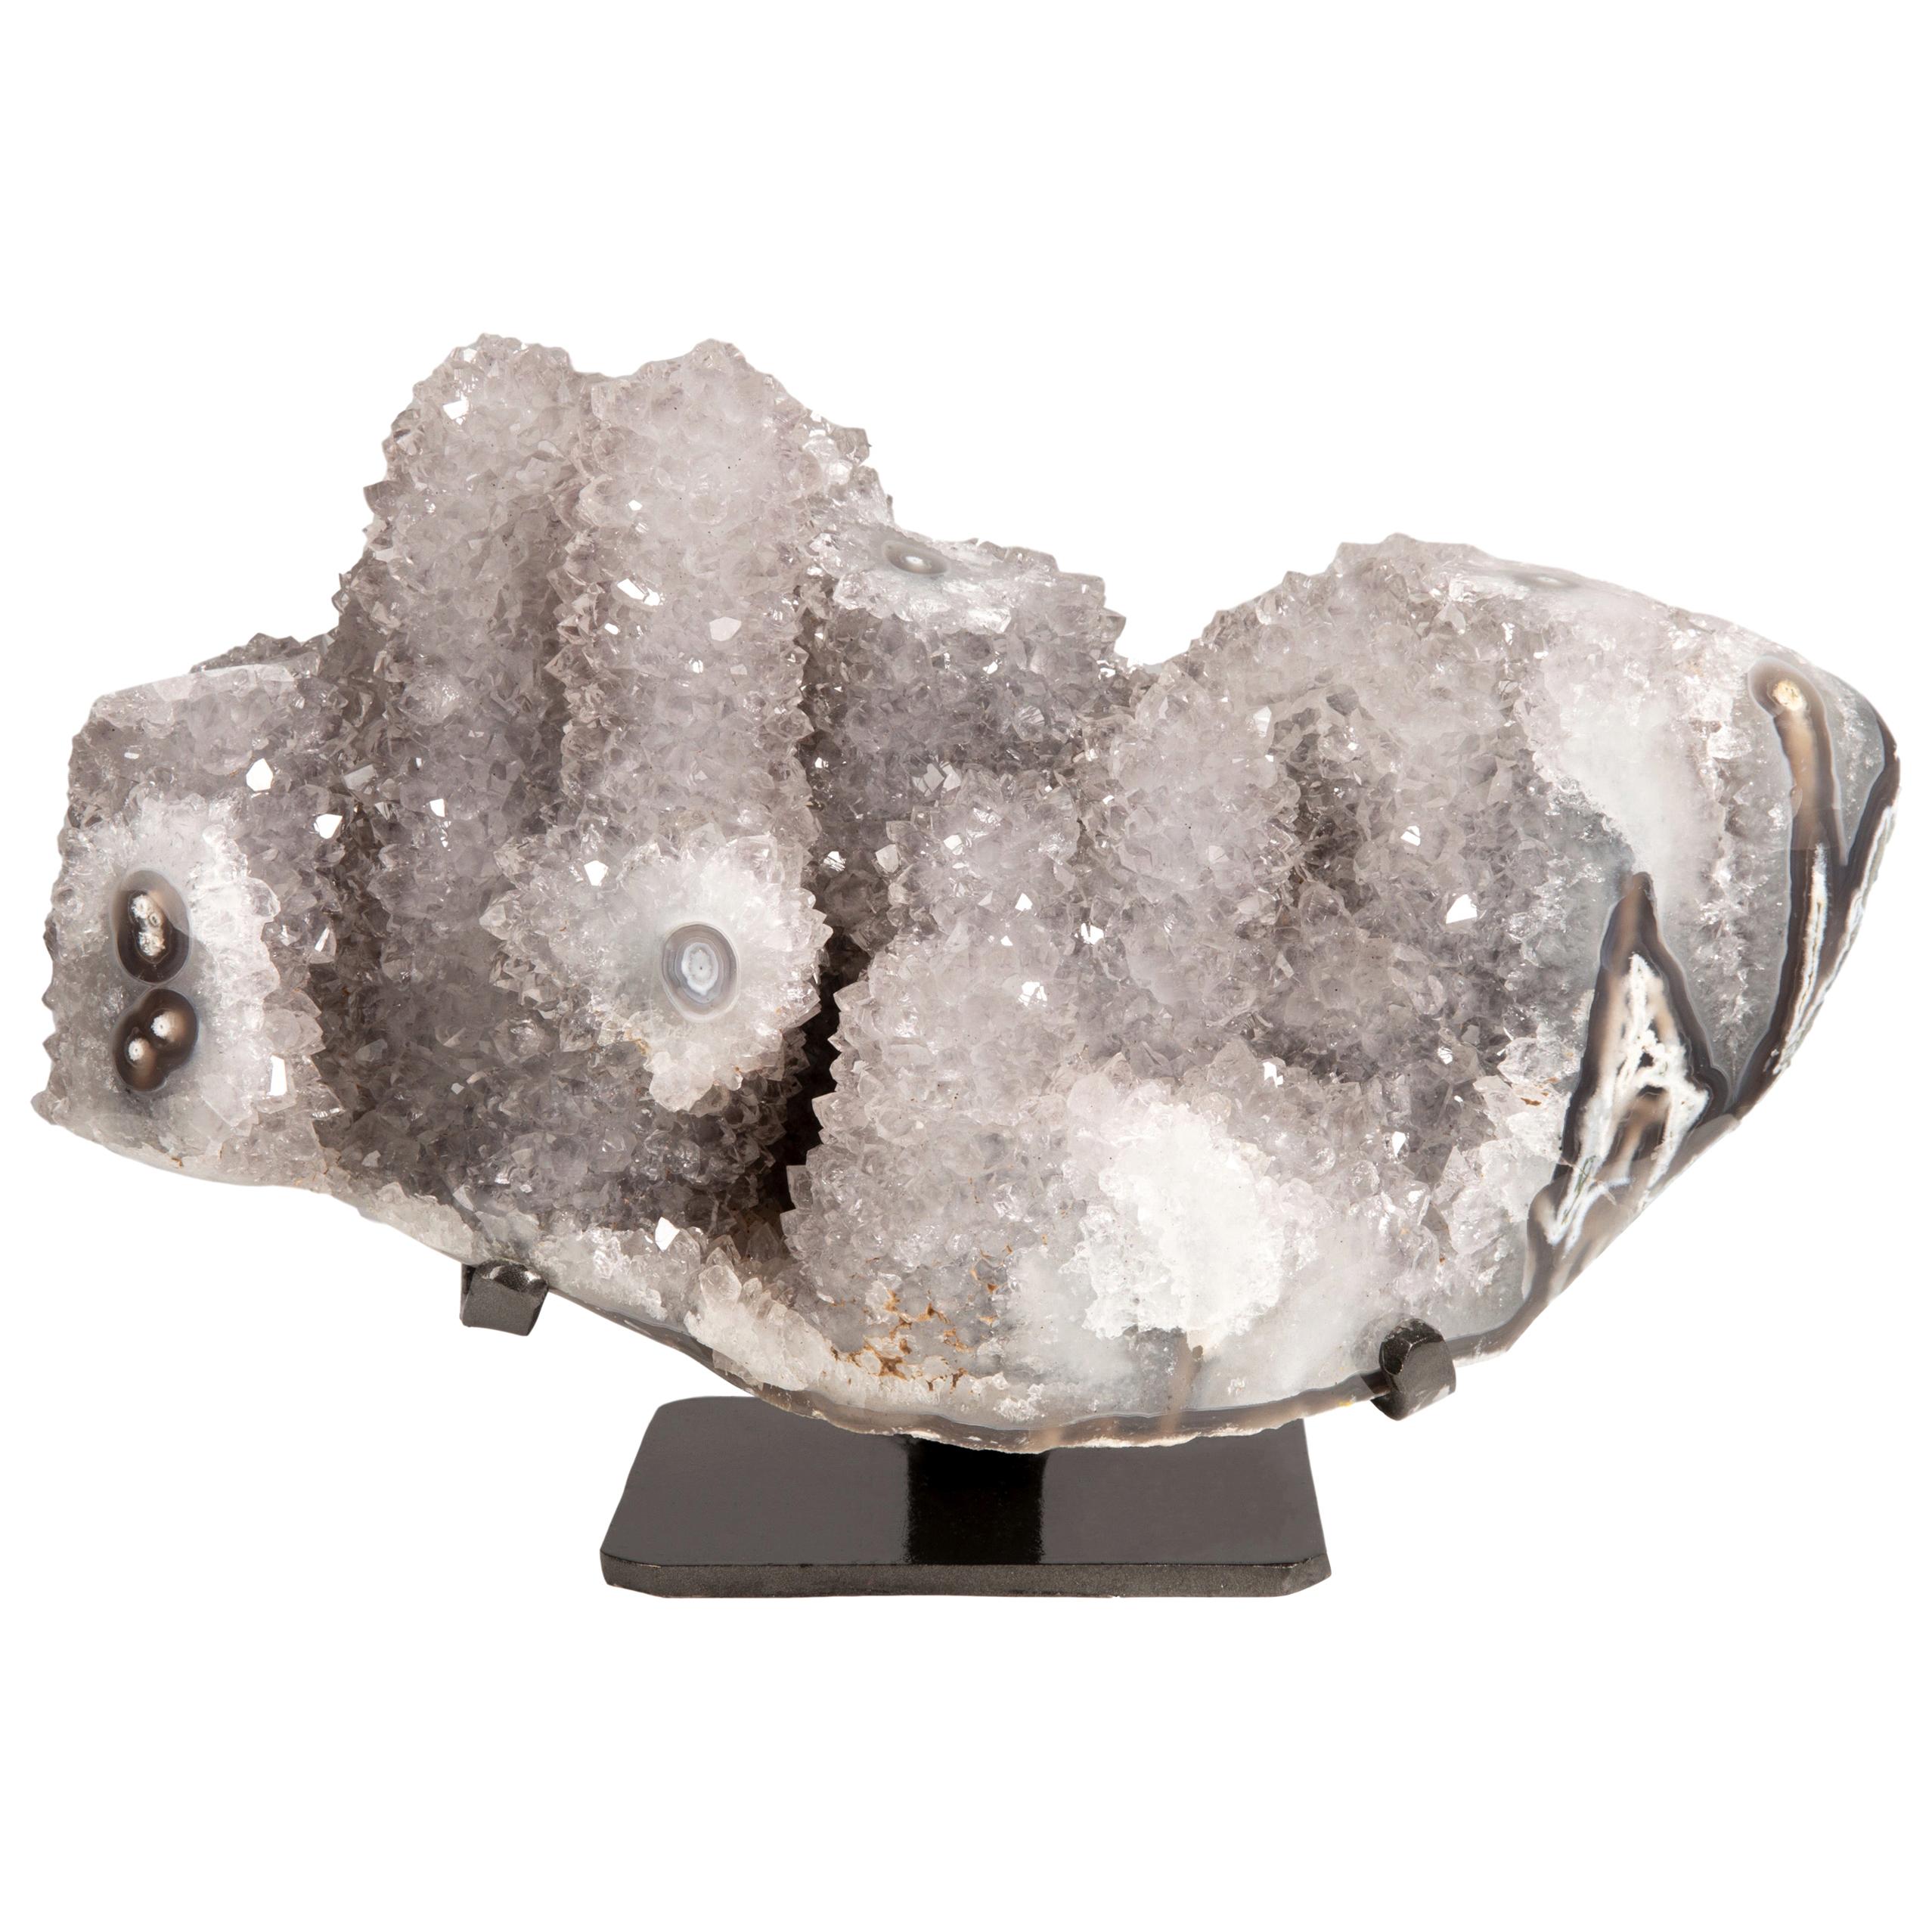 Stunning White Quartz with Grey/Brown Druze Stalactite Formations on Metal Stand